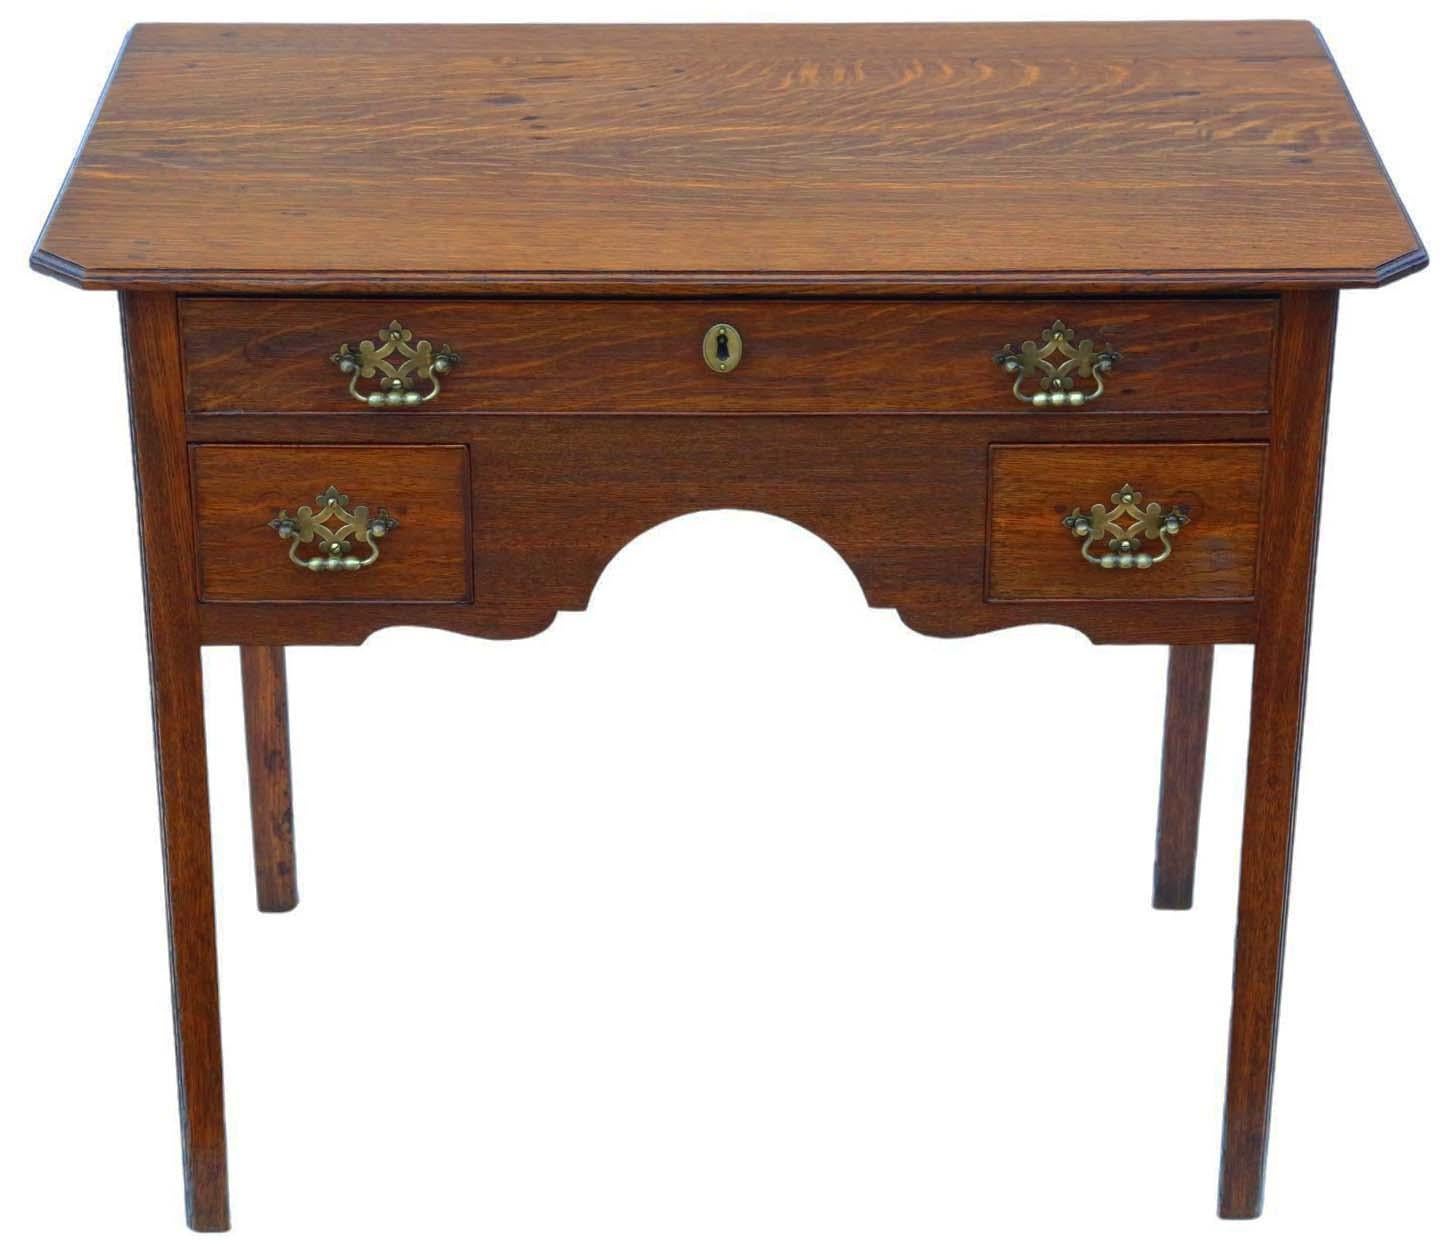 Introducing an Antique Fine Quality 19th Century Oak Writing Table, which also serves as a desk, dressing lamp, or large bedside table, showcasing a classical Georgian design.

Recently restored, the finishes of this exceptional piece are